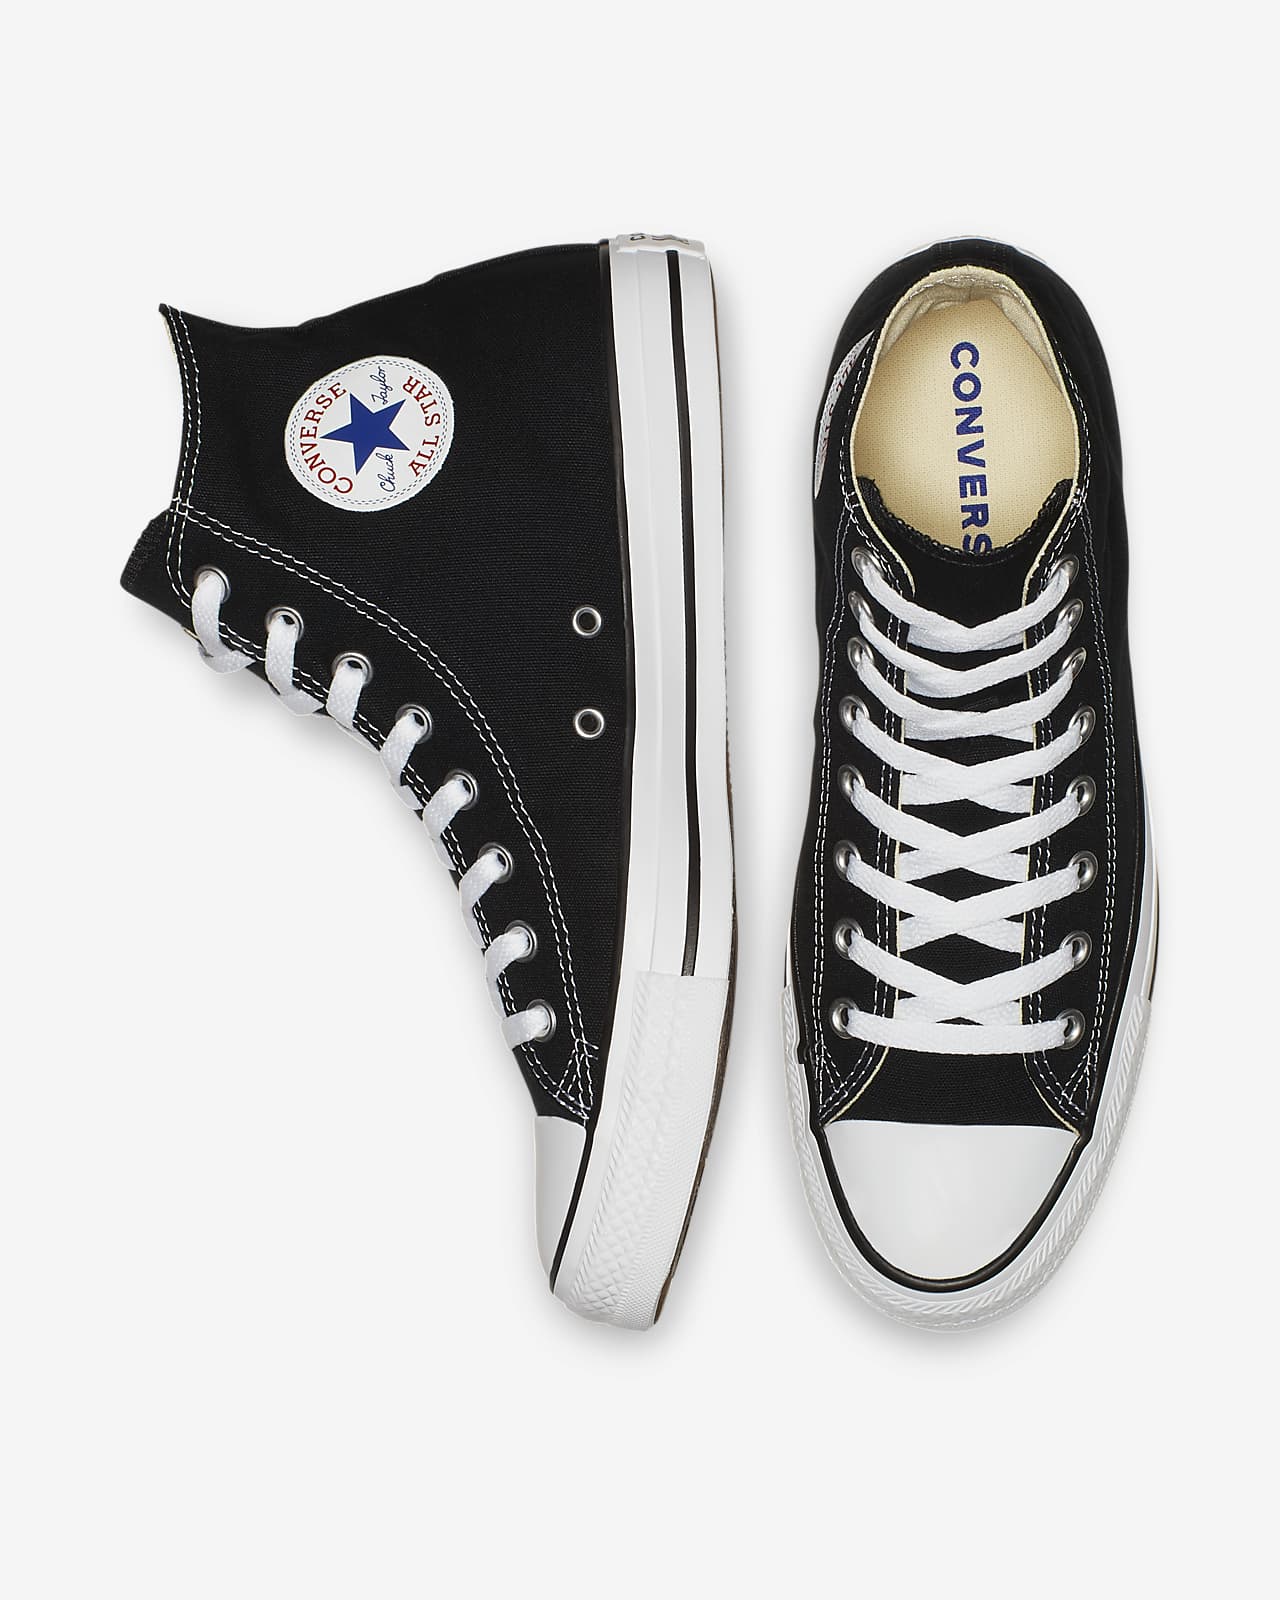 Staat Zaklampen Familielid Converse Chuck Taylor All Star High Top Unisex Shoes. Nike.com